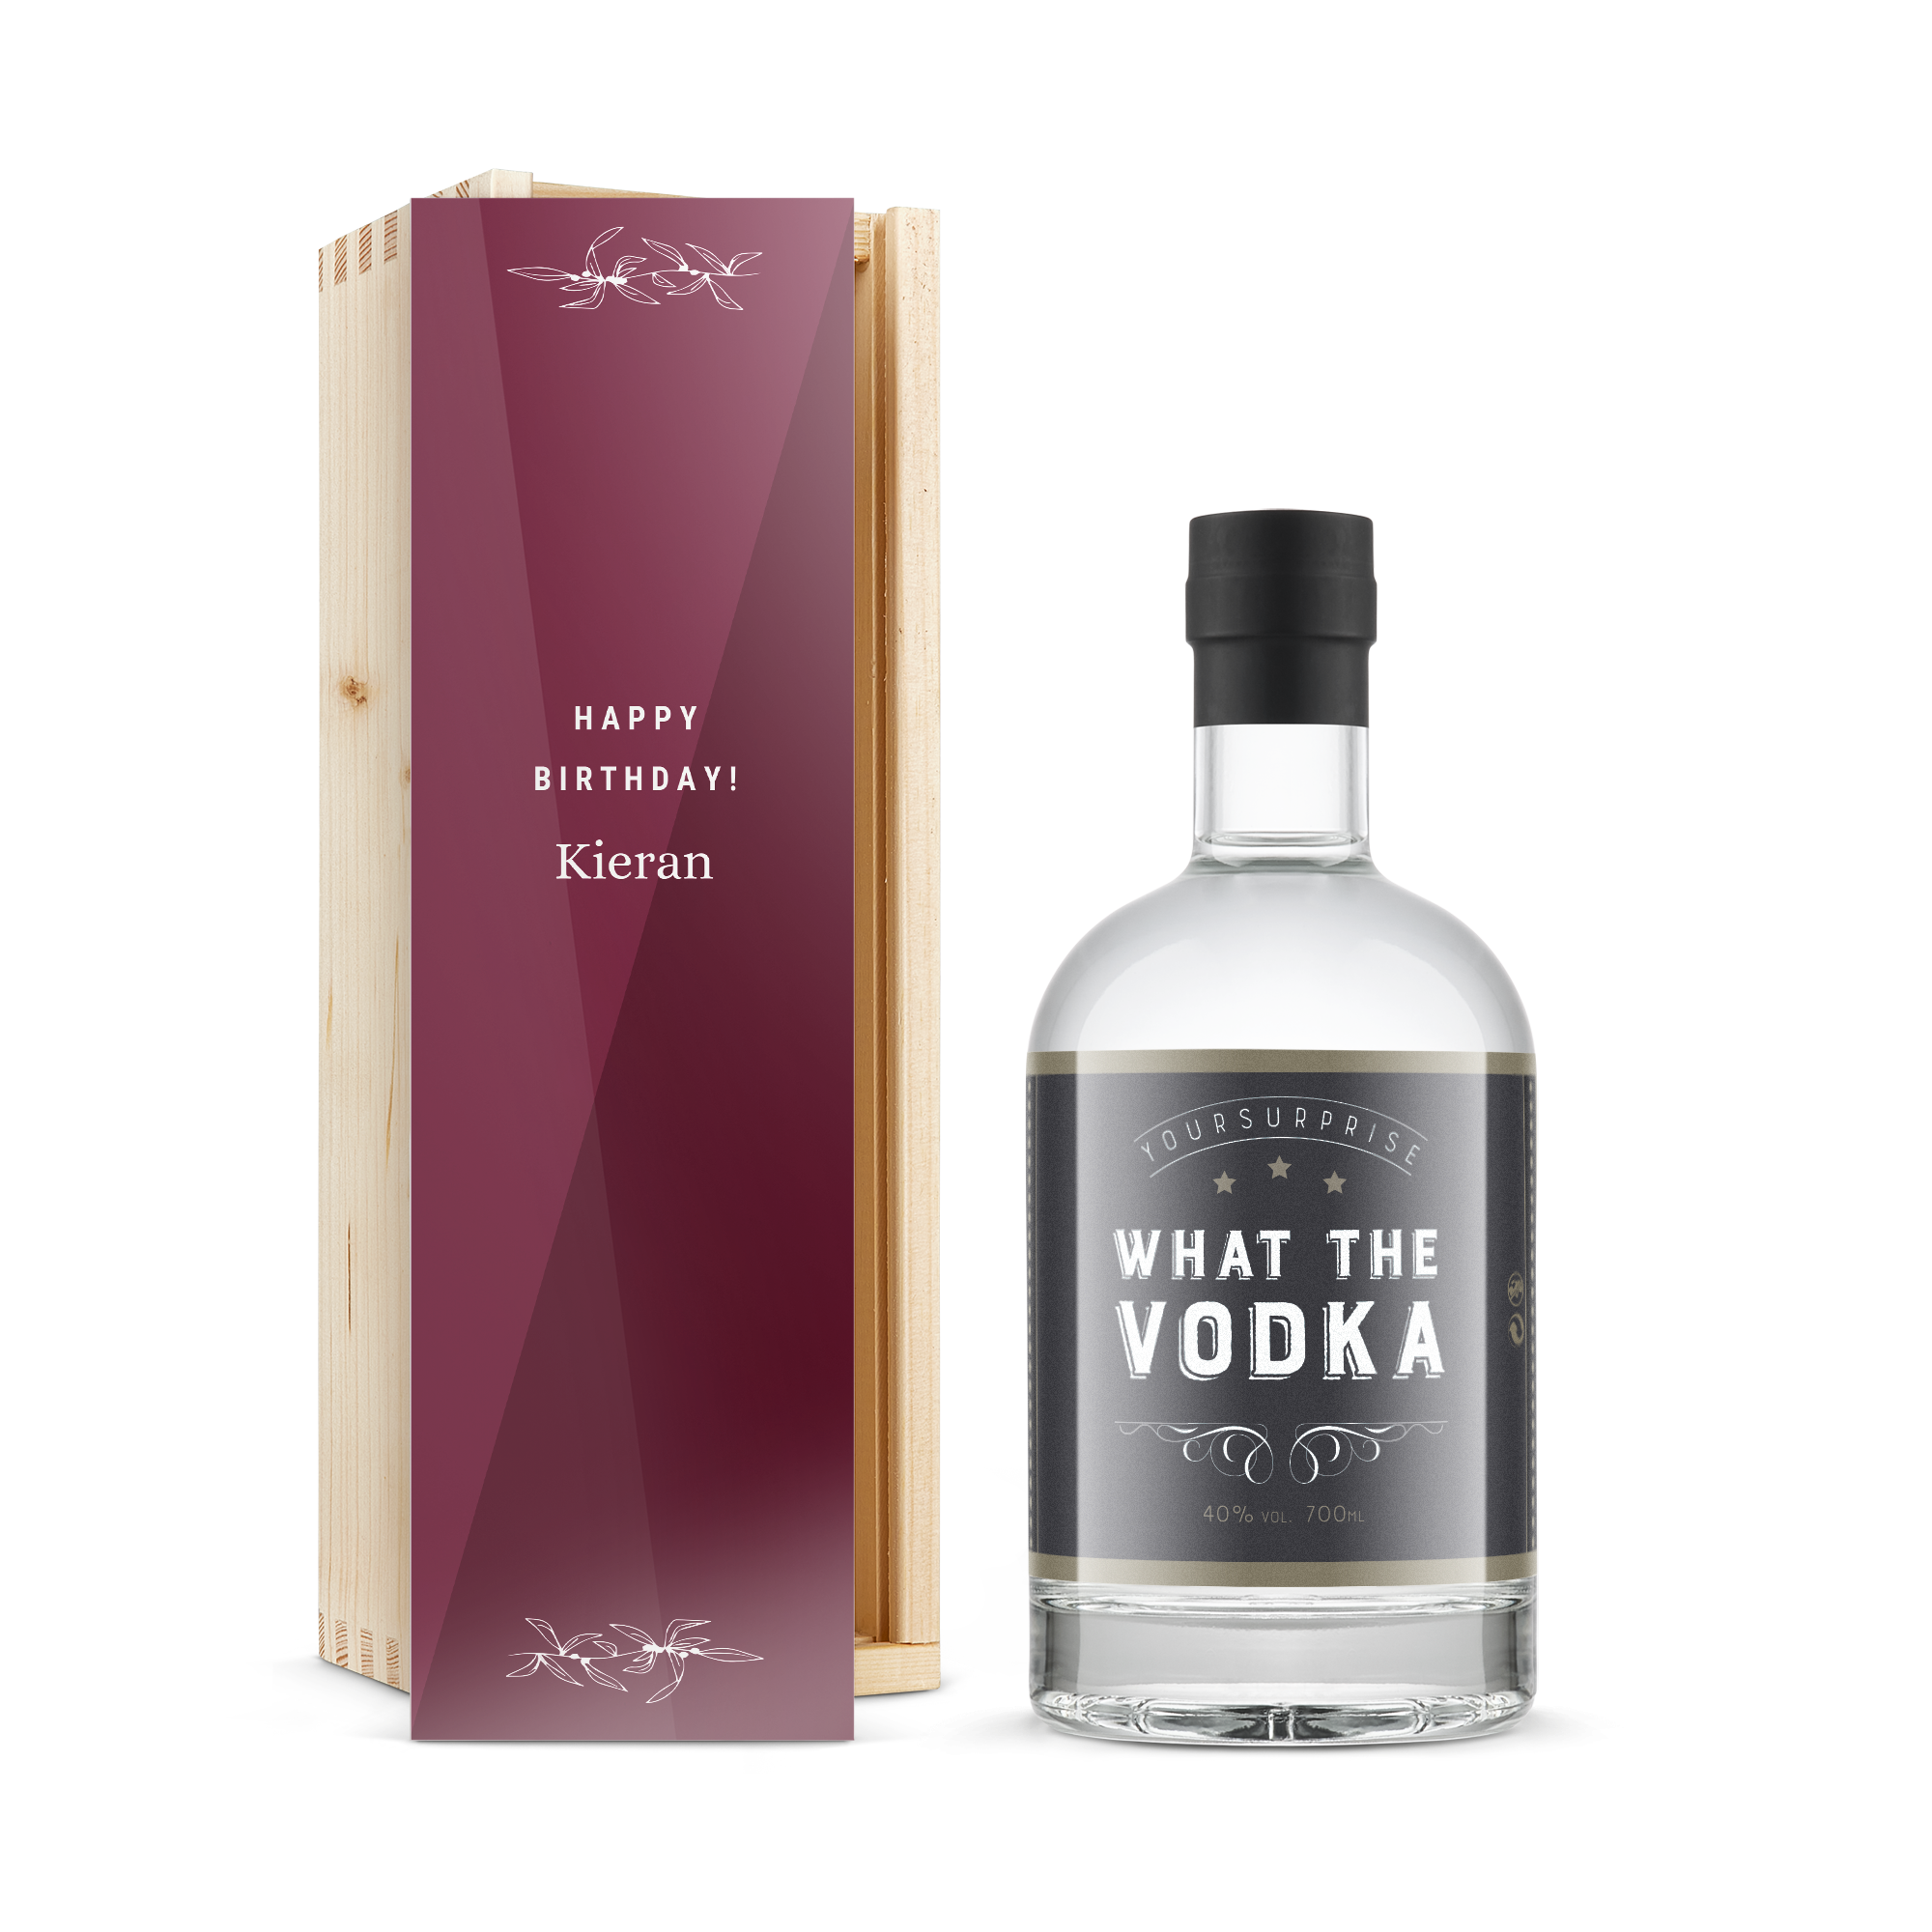 Personalised vodka gift - YourSurprise - Printed wooden case